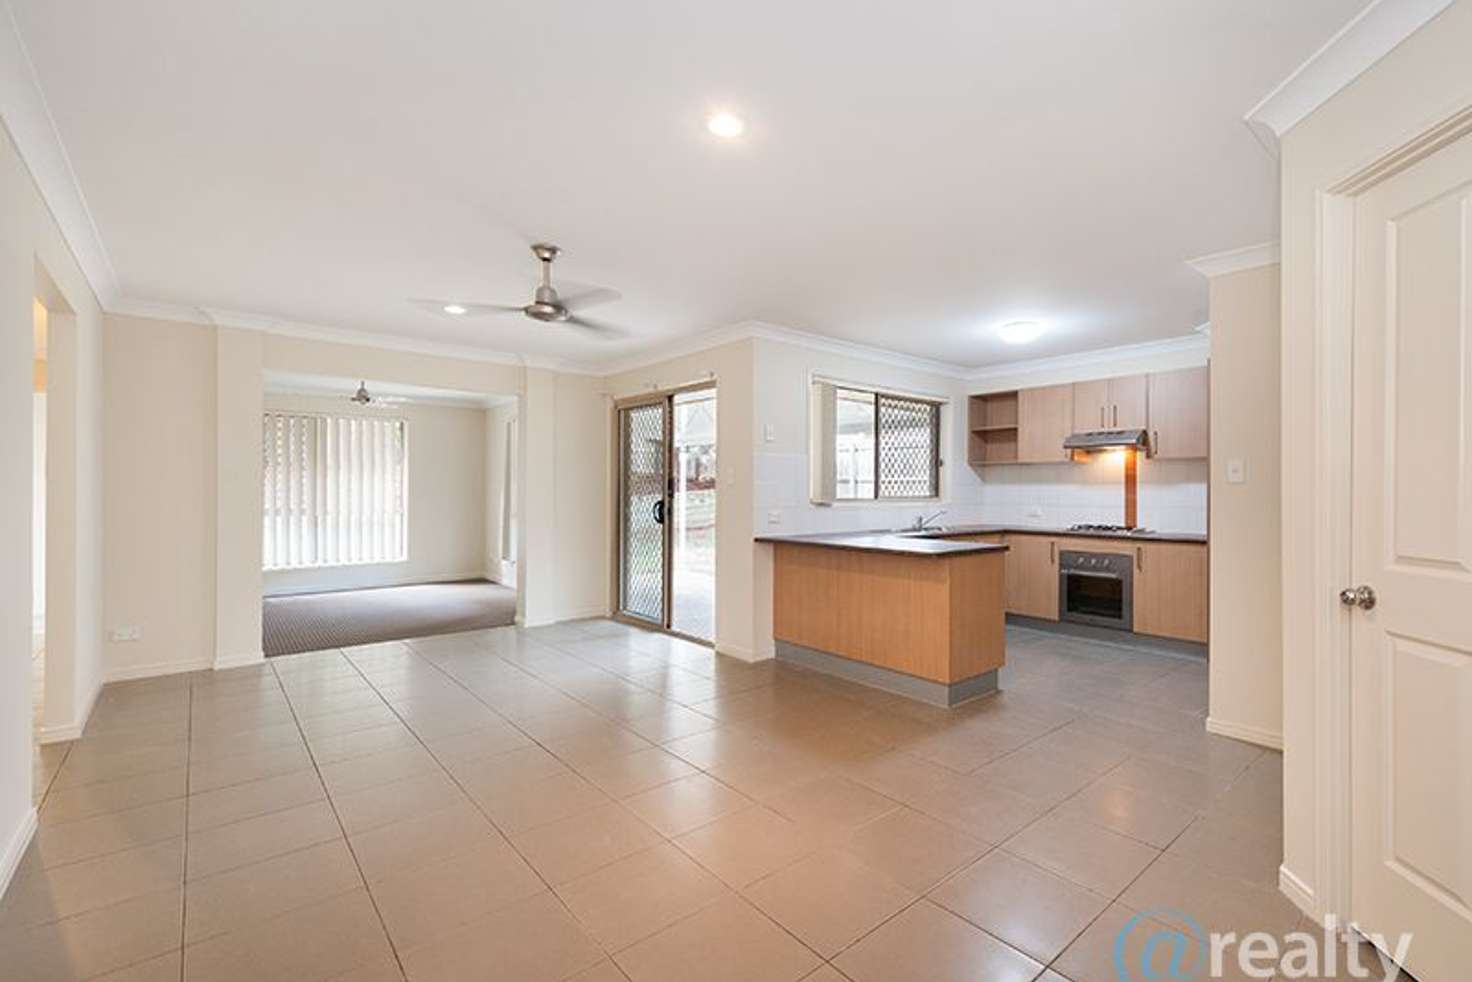 Main view of Homely house listing, 3 Serenity Street, Brassall QLD 4305